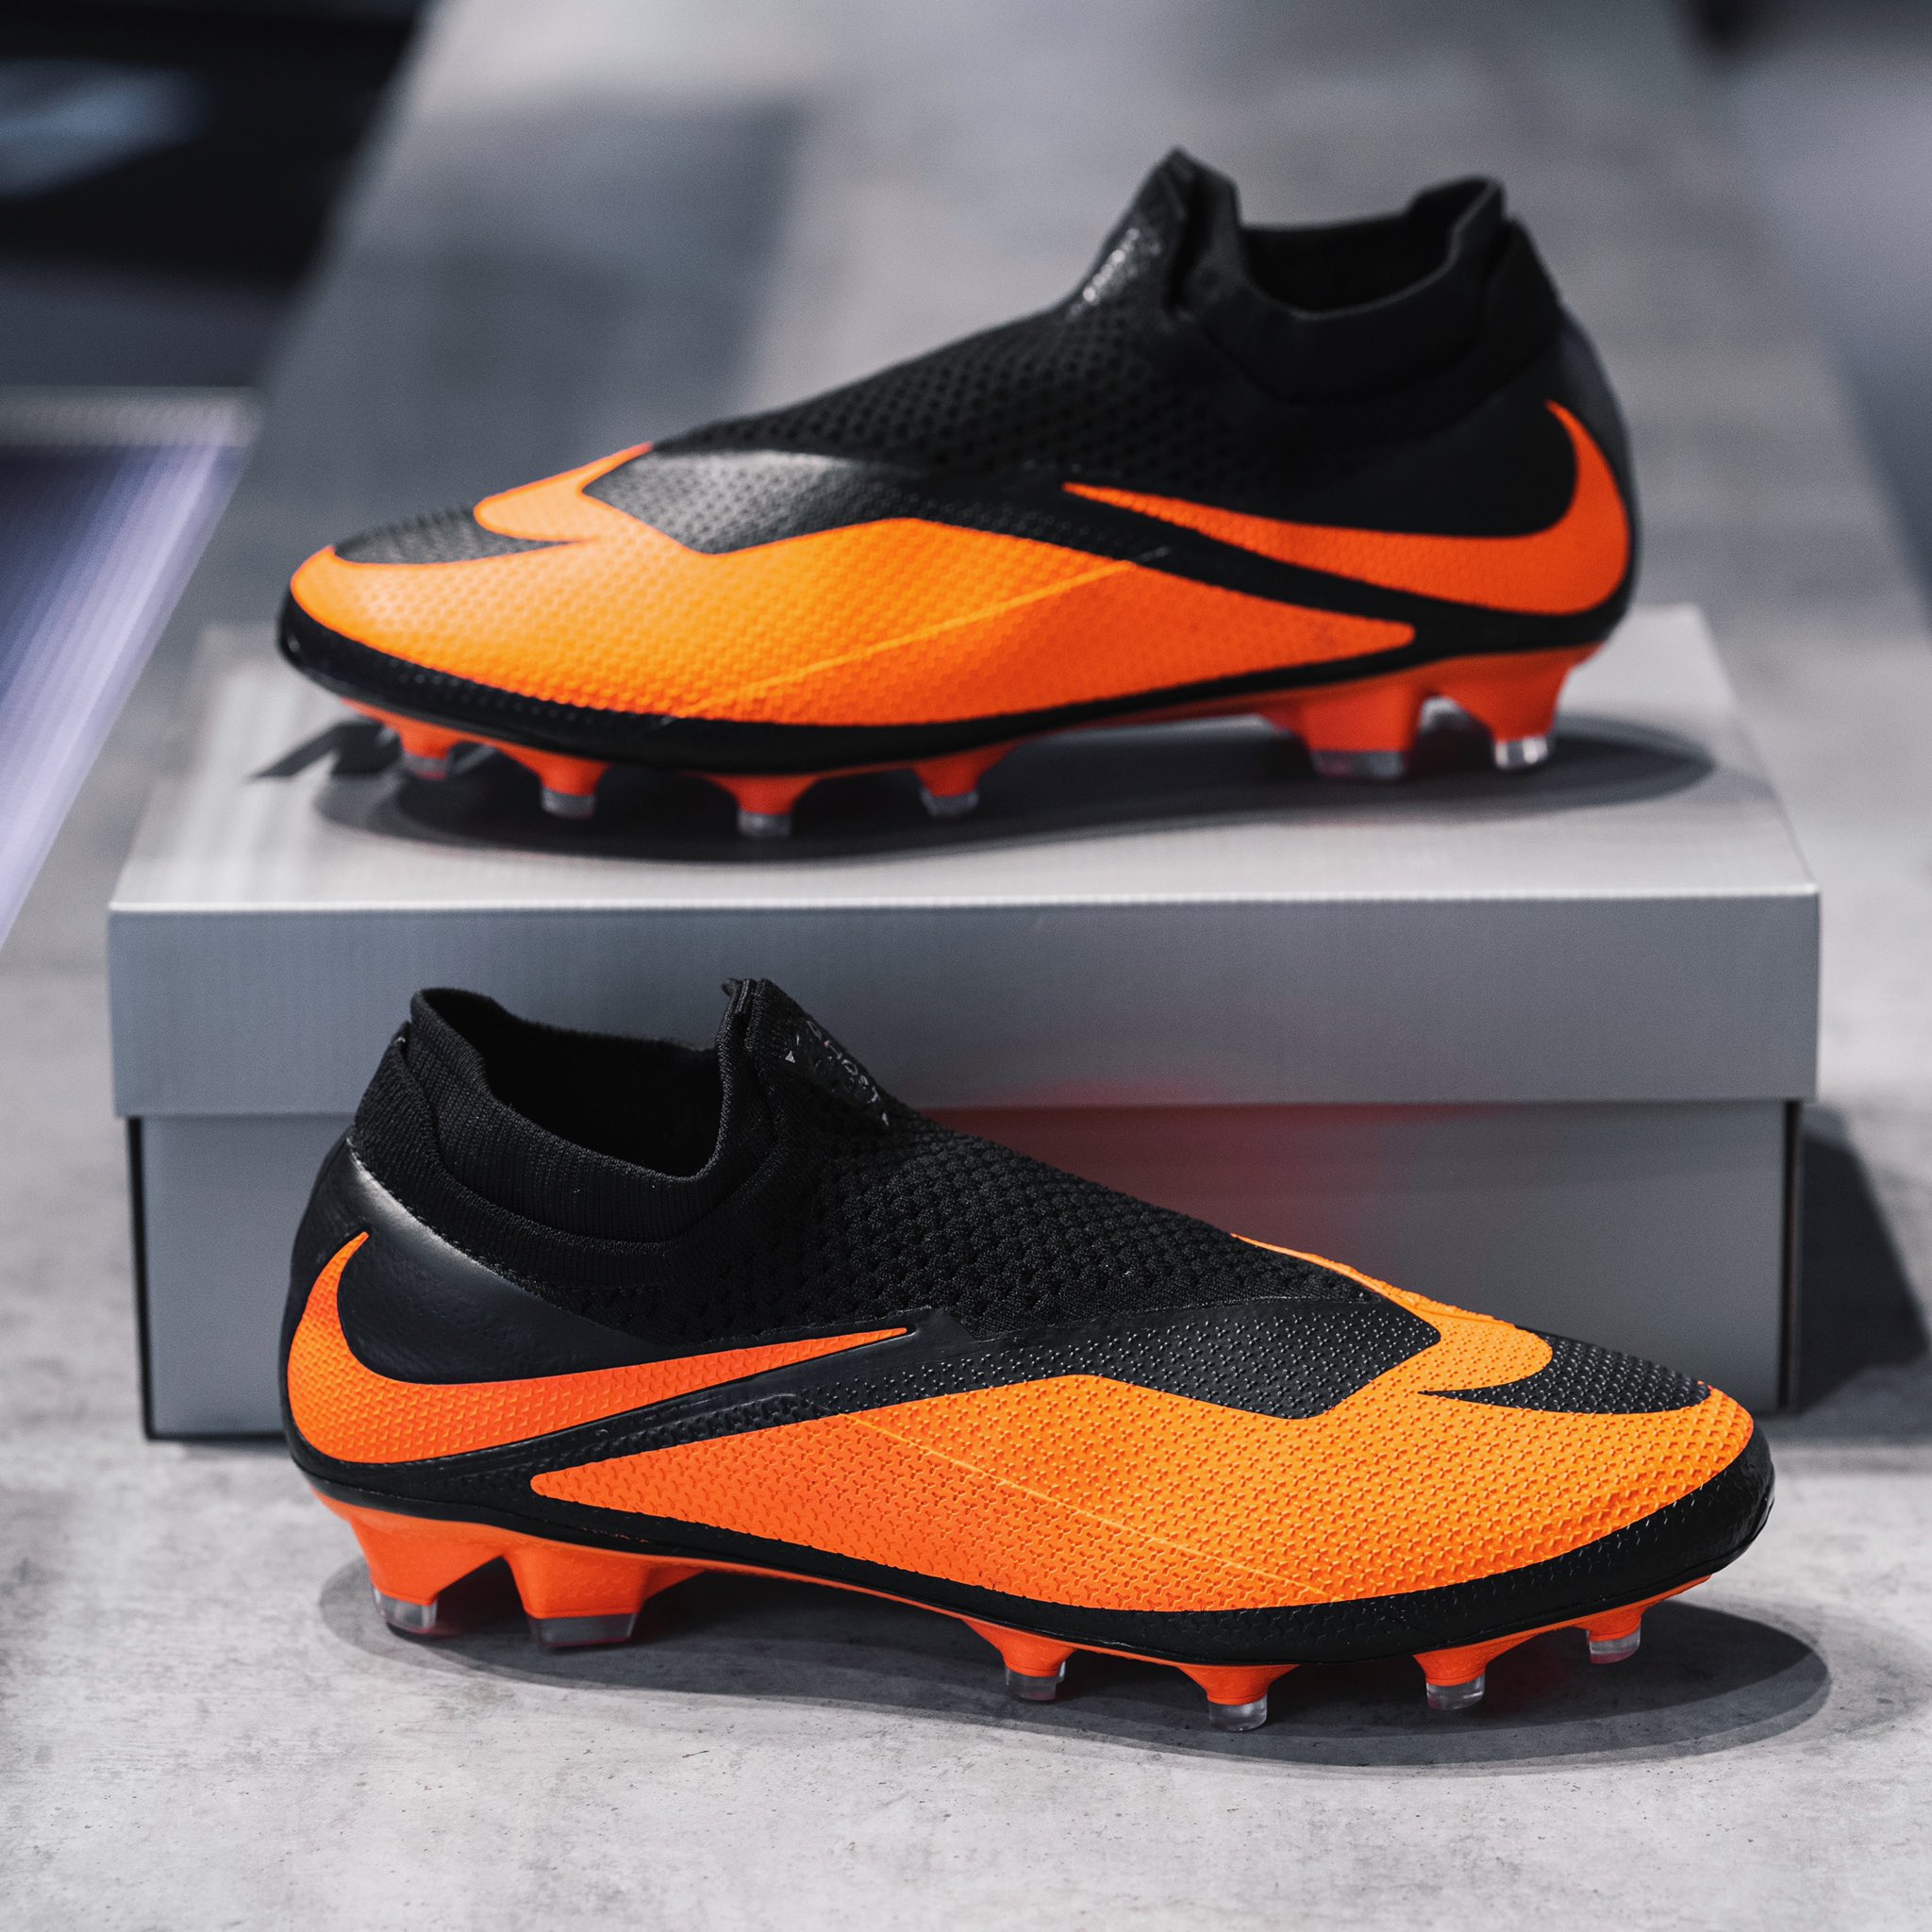 Pro:Direct Soccer Twitter: "Just Dropped 🔥 Nike Future DNA Hypervenom in "Bright Citrus &amp; Black". A nod to a past great of 2013. Cop first and fast at #ProDirect https://t.co/OOBC9wHD6k